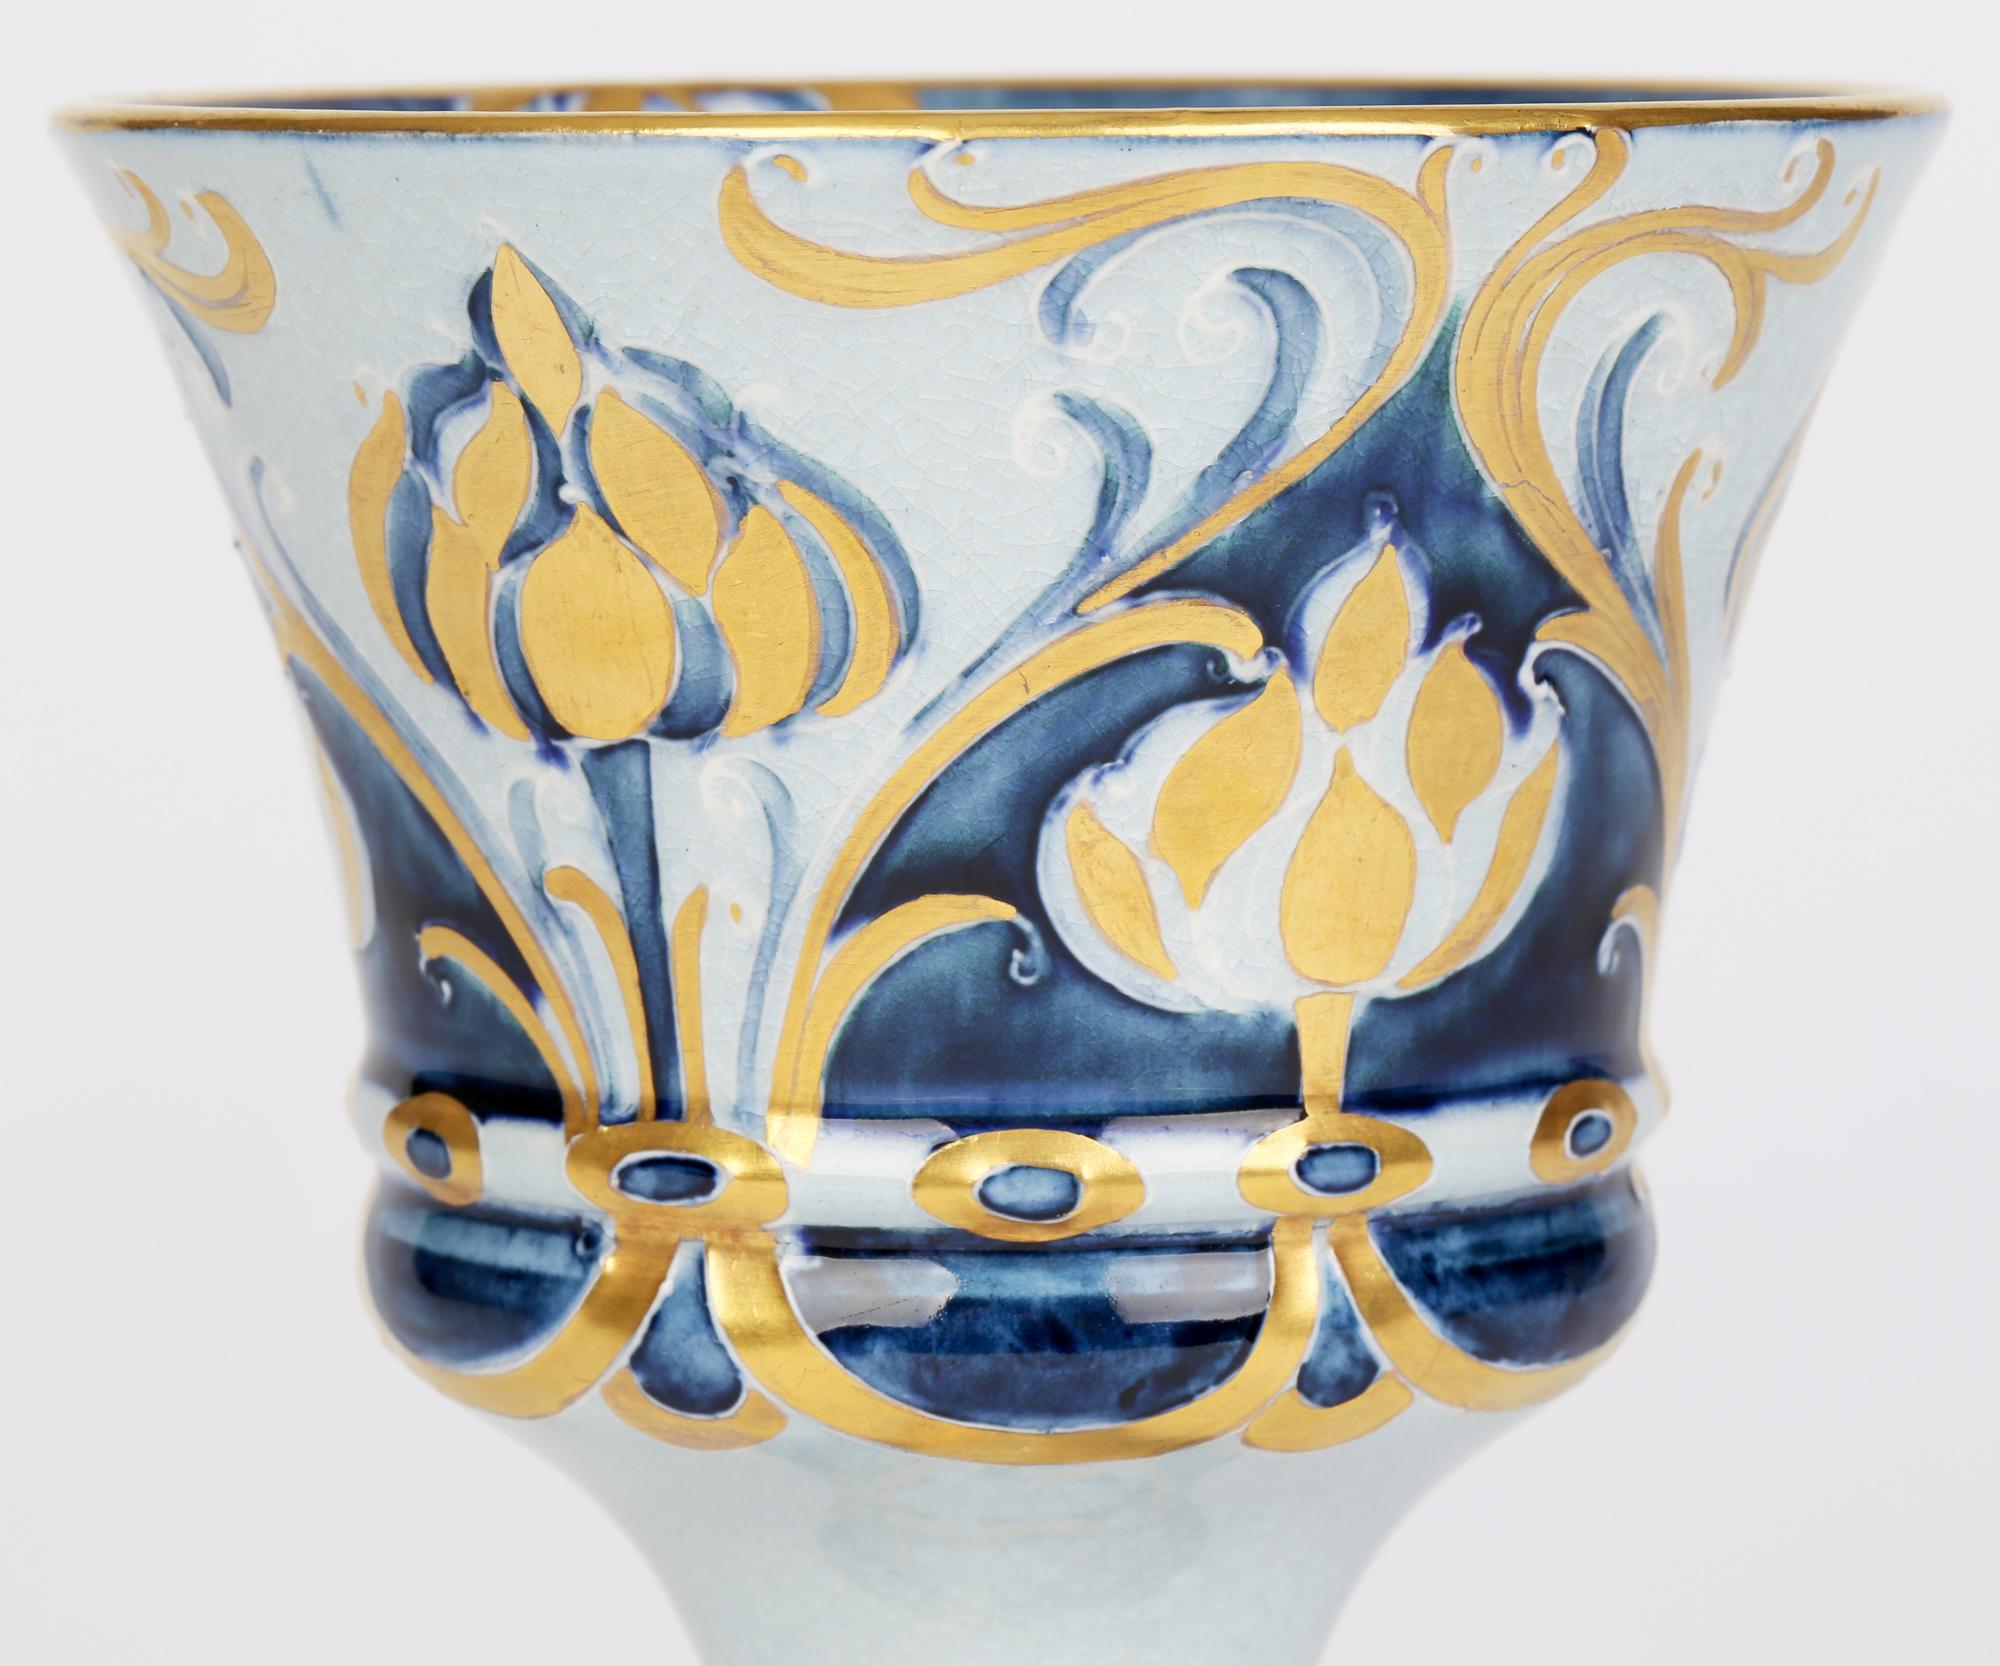 Art Nouveau James MacIntyre & Co. Florian Ware goblet decorated with tube lined decoration in a ‘Dahlia’ variant design by William Moorcroft and dating from 1903. William Moorcroft started out as a designer before becoming director of the art